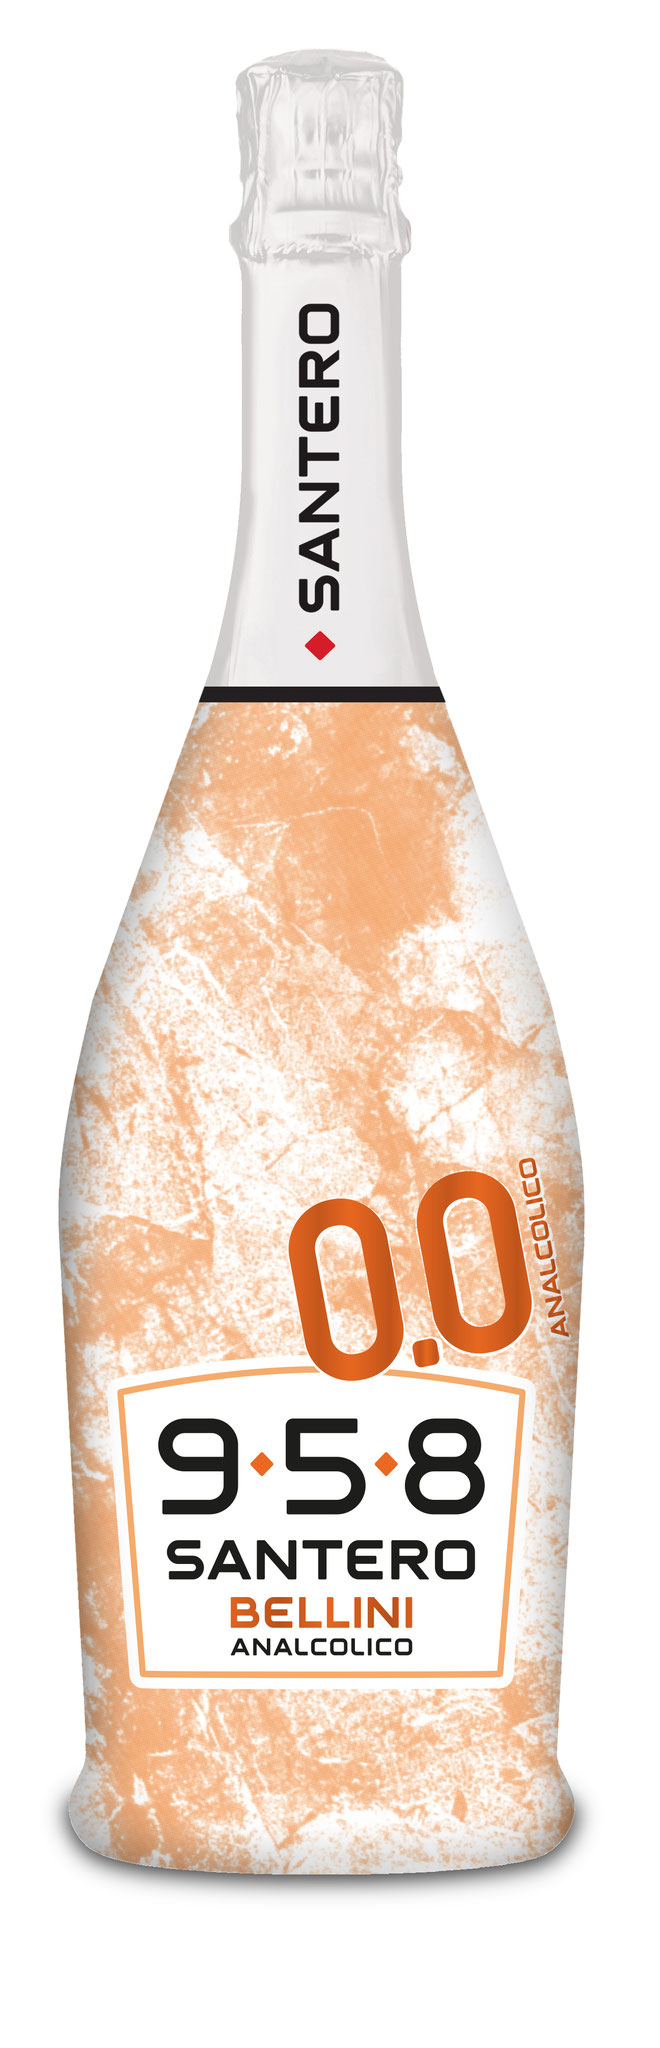 Santero 958 -  the unmatched Bellini sparkling wine also without alcohol!